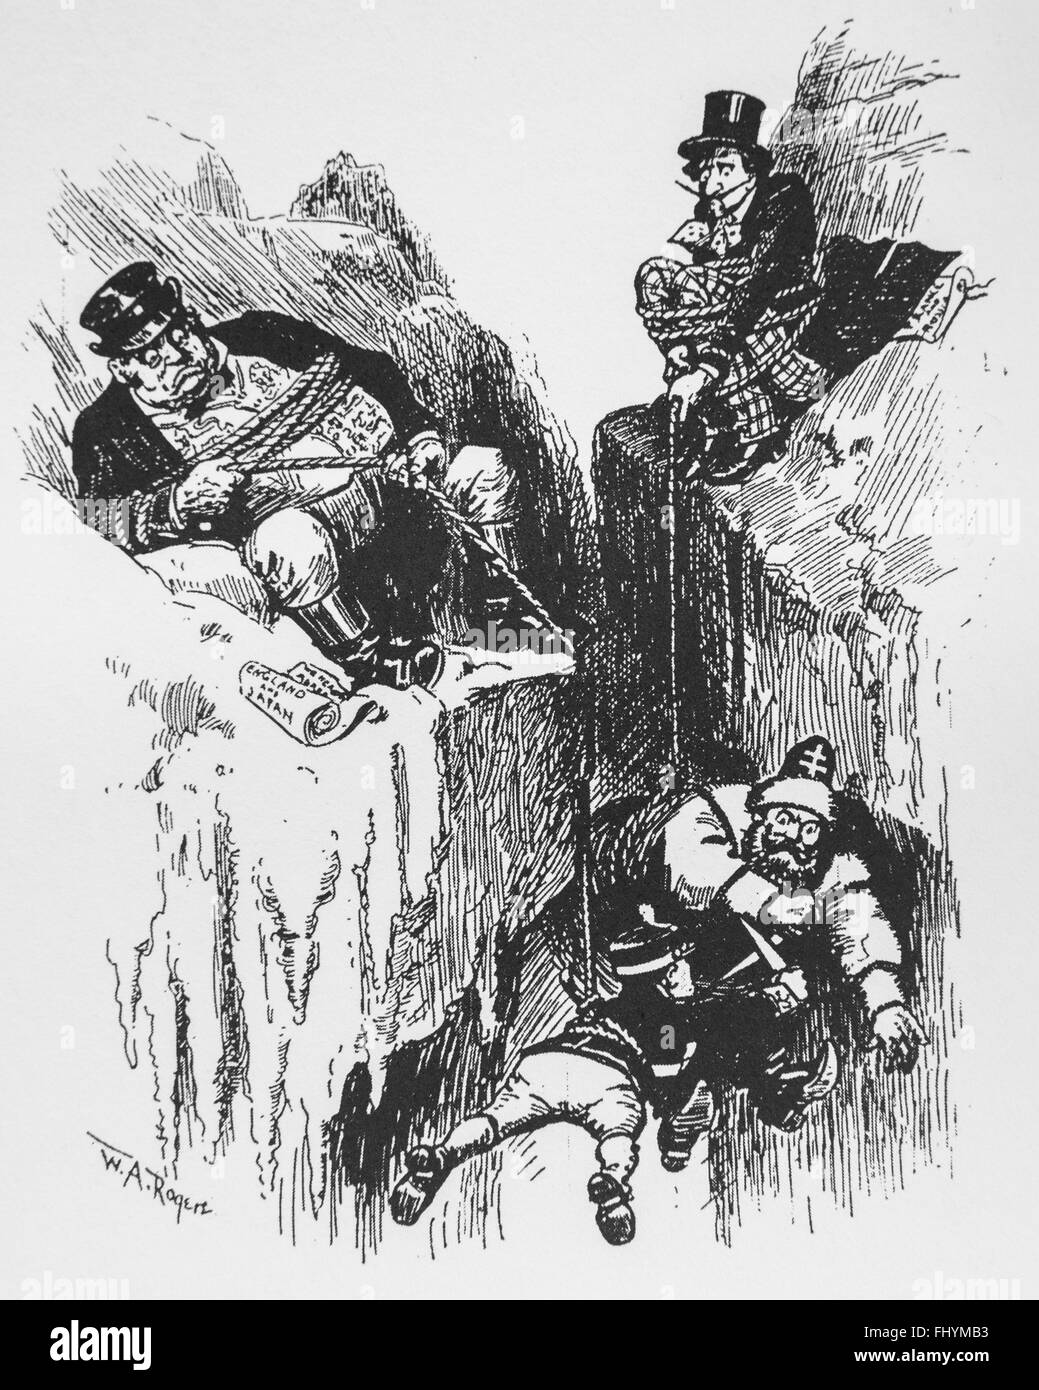 Caricature of Russo-Japanese War . Support of Anglo-Japanese Alliance and Franco-Russian Alliance 1904. UK and France are supporting their allied nations. Documents beside their are treaty. But they don't want to fight directly. by William Allen Rogers, published in Harper's Weekly,  March 12, 1904. Stock Photo